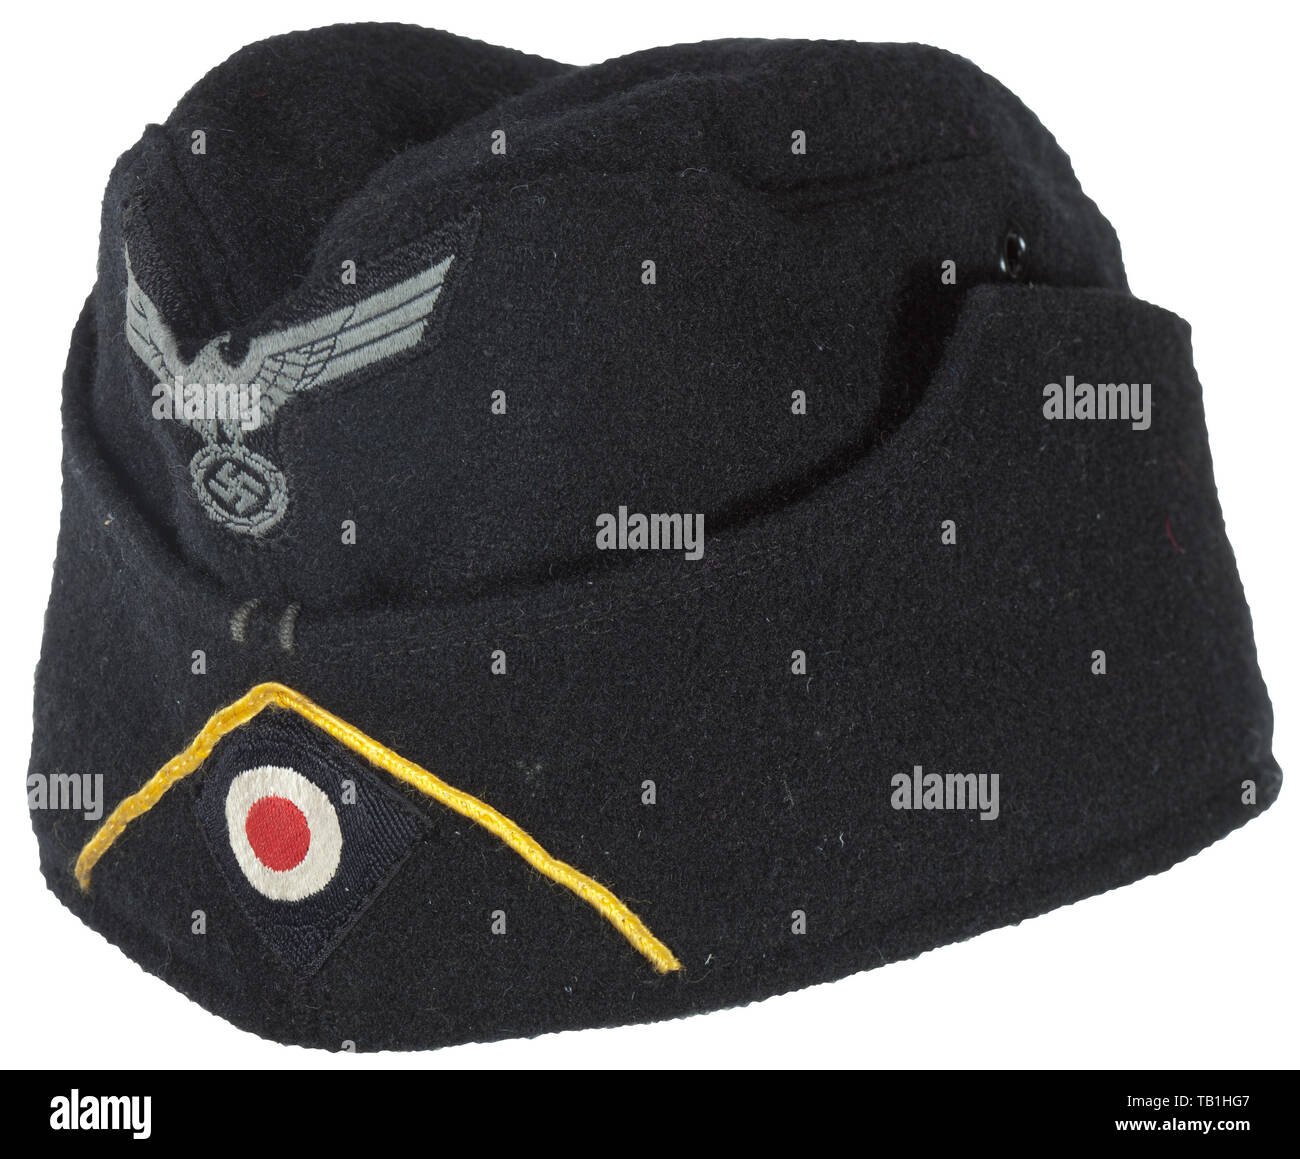 A field cap and jacket M 43 of an NCO in a reconnaissance detachment of the division 'Feldherrnhalle' - special clothing issue of the armoured units, The field cap made of black cotton cloth, soutache chevron in the golden-yellow branch colour, machine-woven national eagle and cockade on black silk base cloth. Beige cotton lining, two ventilation rivets, size stamp '54'. Jacket for a non-commissioned officer of the armoured reconnaissance troops made of black cotton. Depot and size stamps as well as tailor's name 'Georg Chr. Schultz, M.-Gladbach', Additional-Rights-Clearance-Info-Not-Available Stock Photo